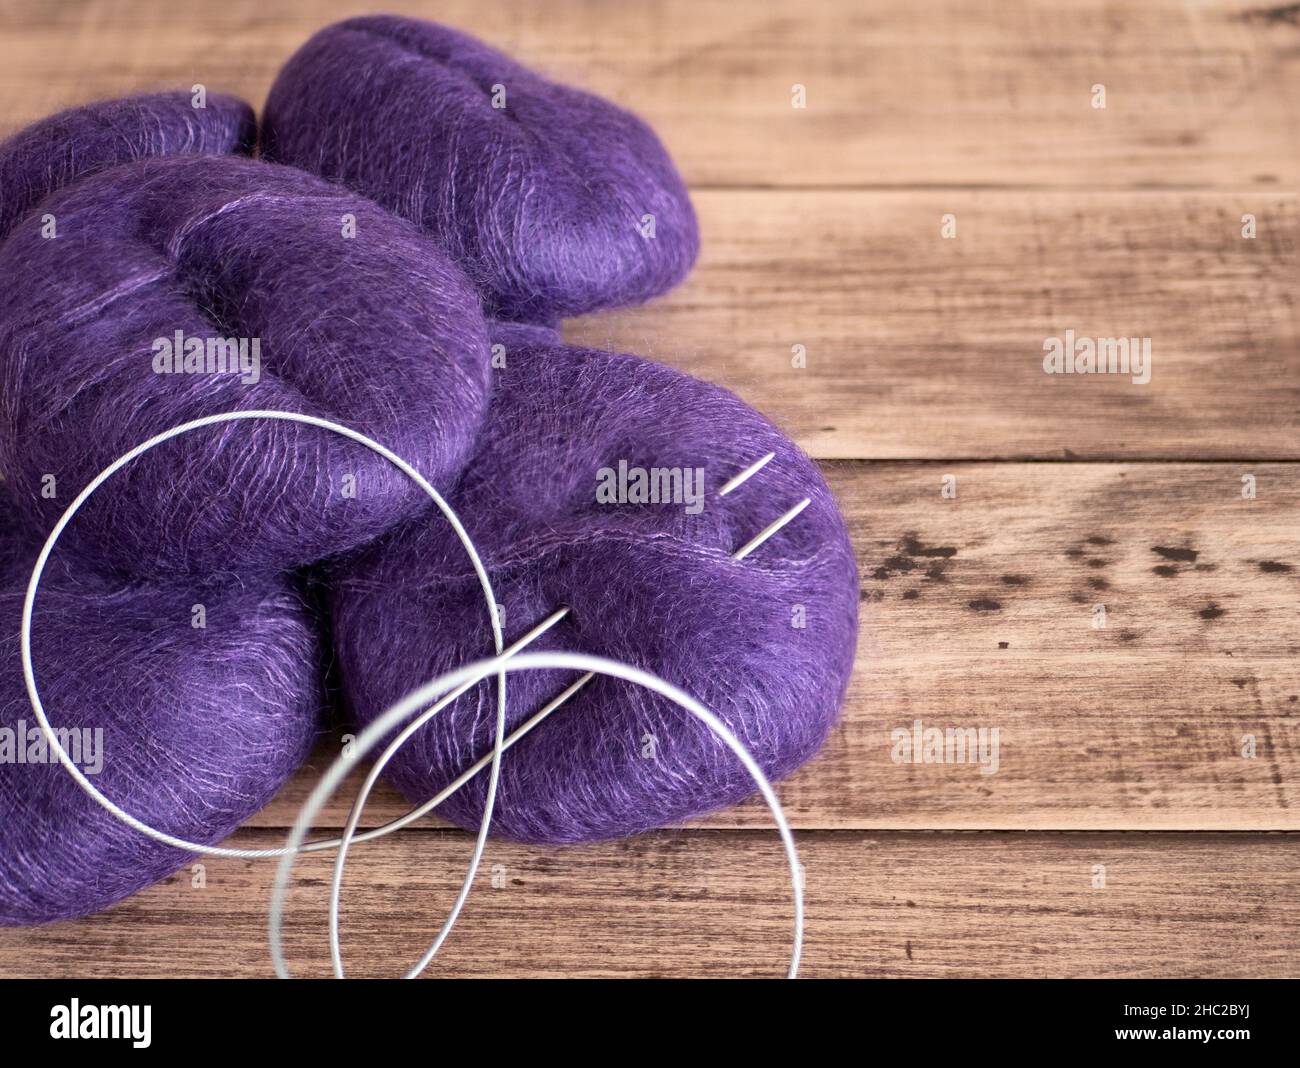 Purple yarn and needles for knitting, close up. Balls of thread and fixed circular knitting needles on rustic wooden background Stock Photo